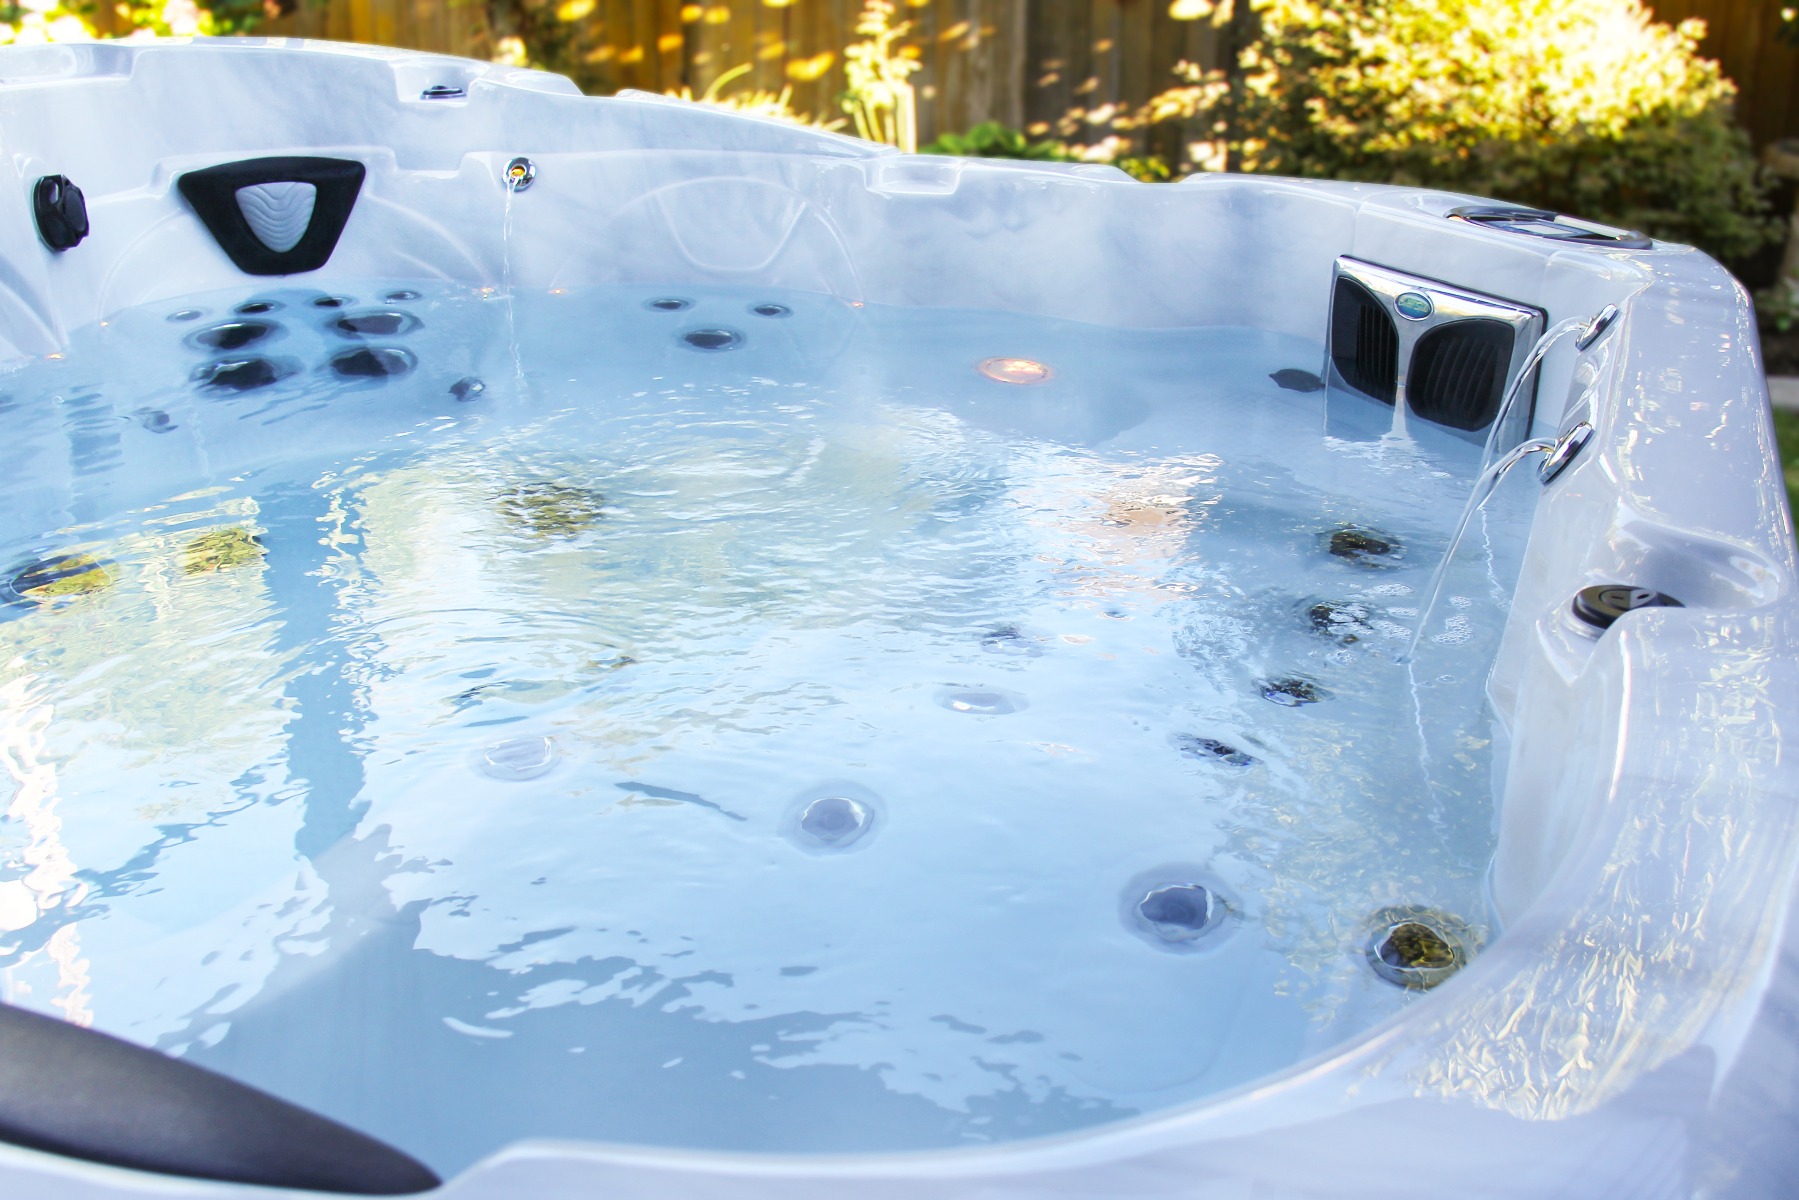 We provide quick and hassle-free solutions to disposing your Hot Tub